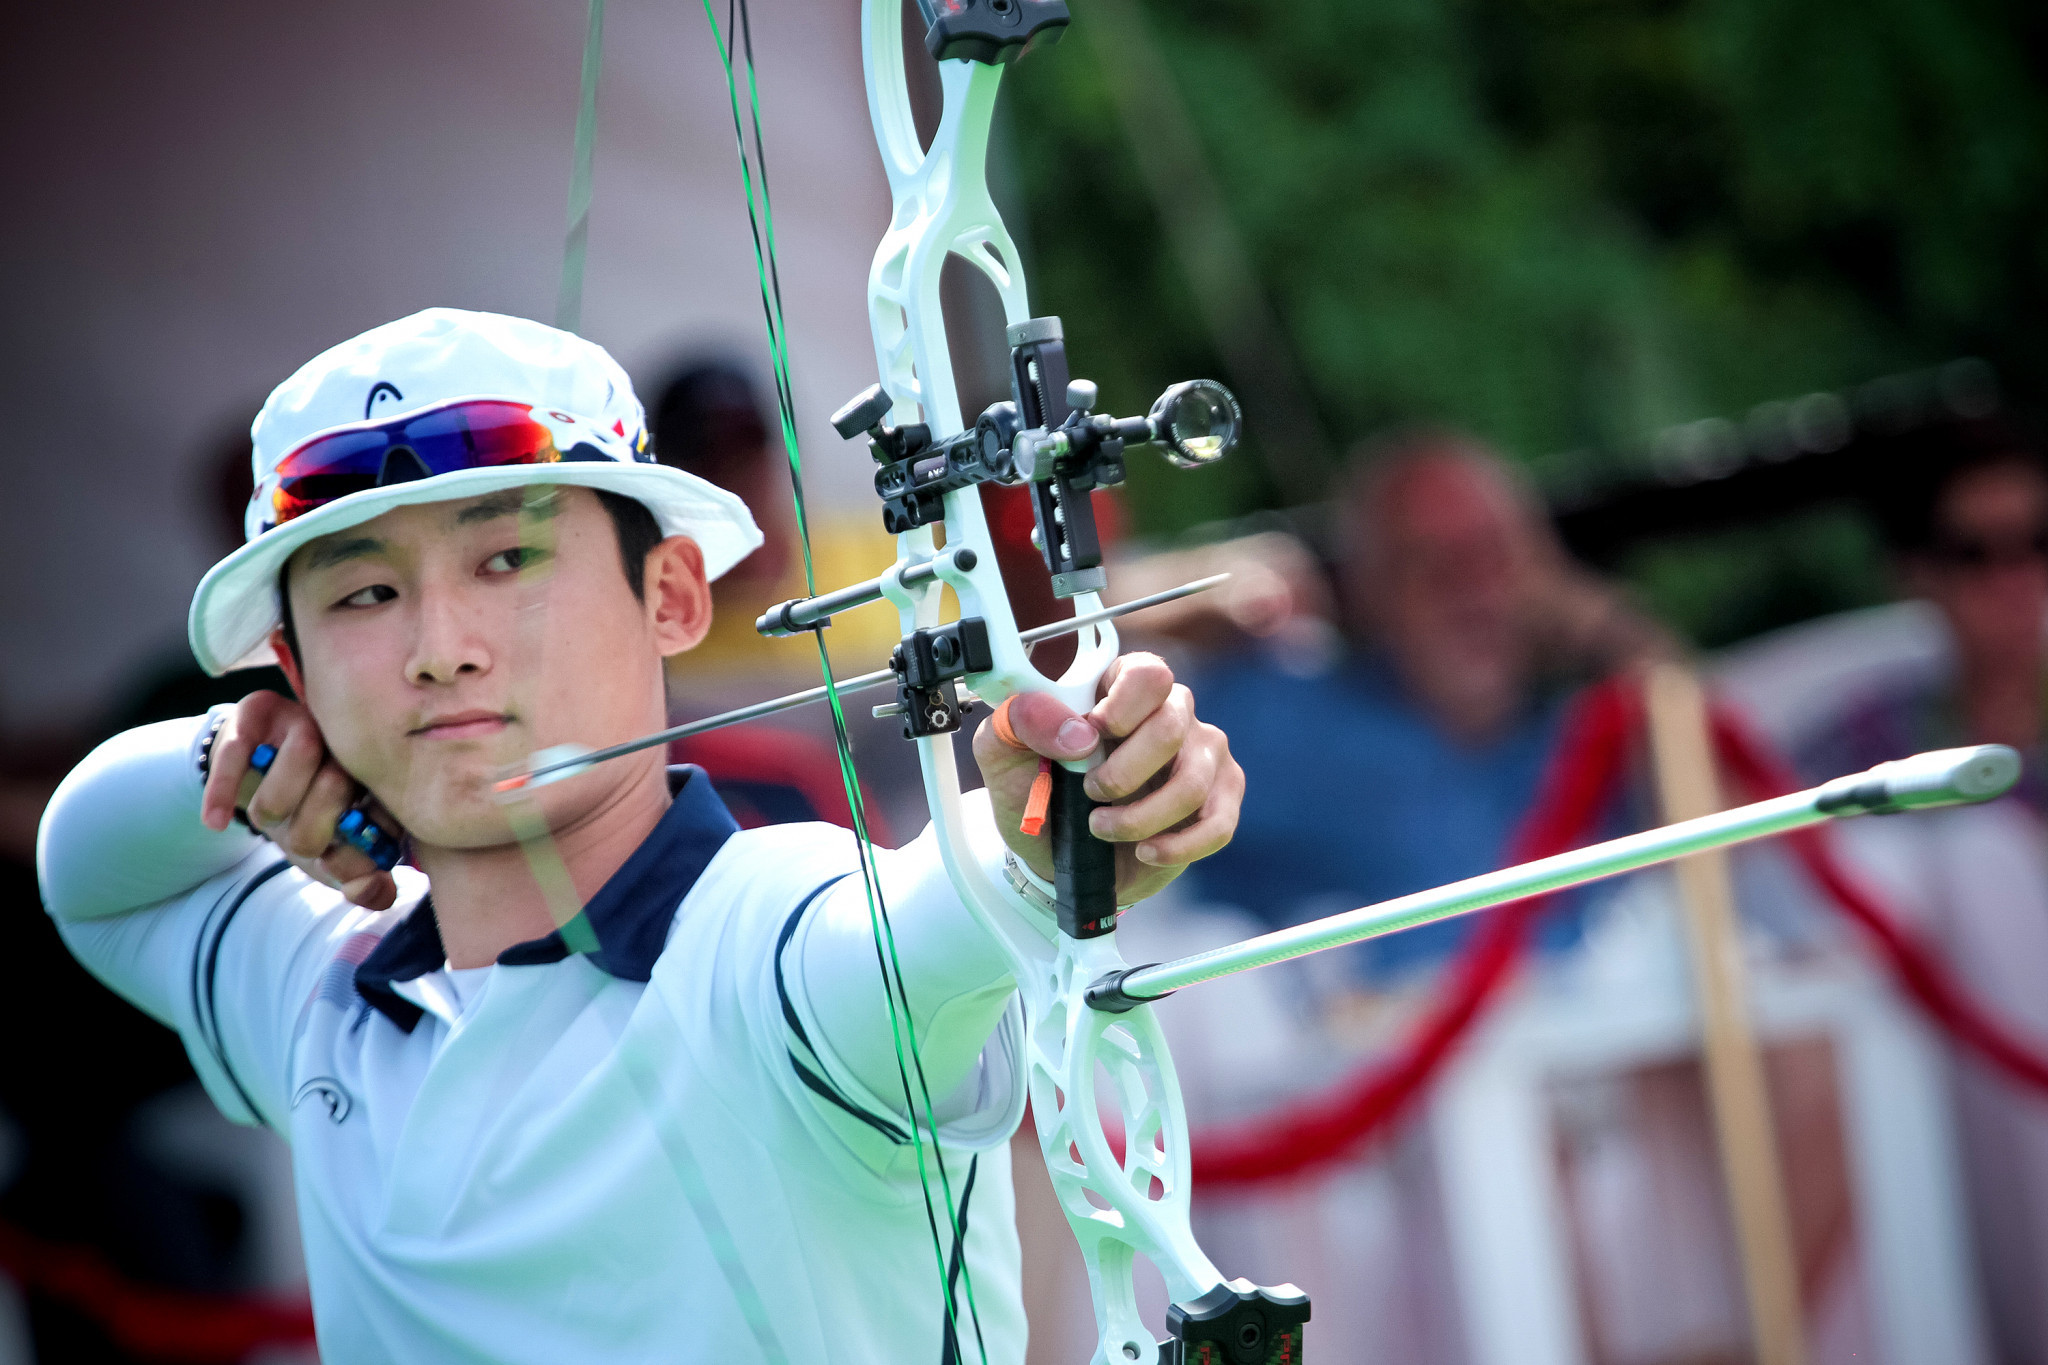 Kim Jong-ho helped South Korea reach the mixed compound archery final ©Getty Images